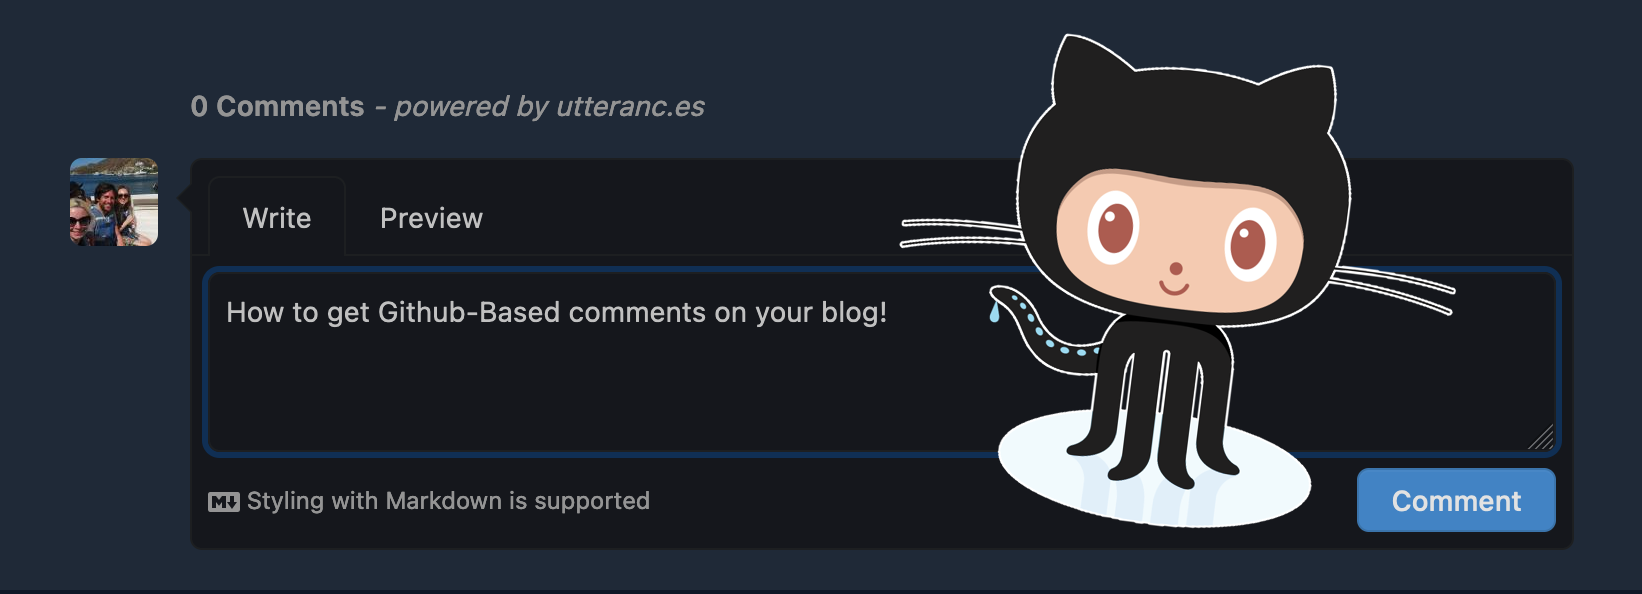 Setting up Github comments on your blog with Utterances